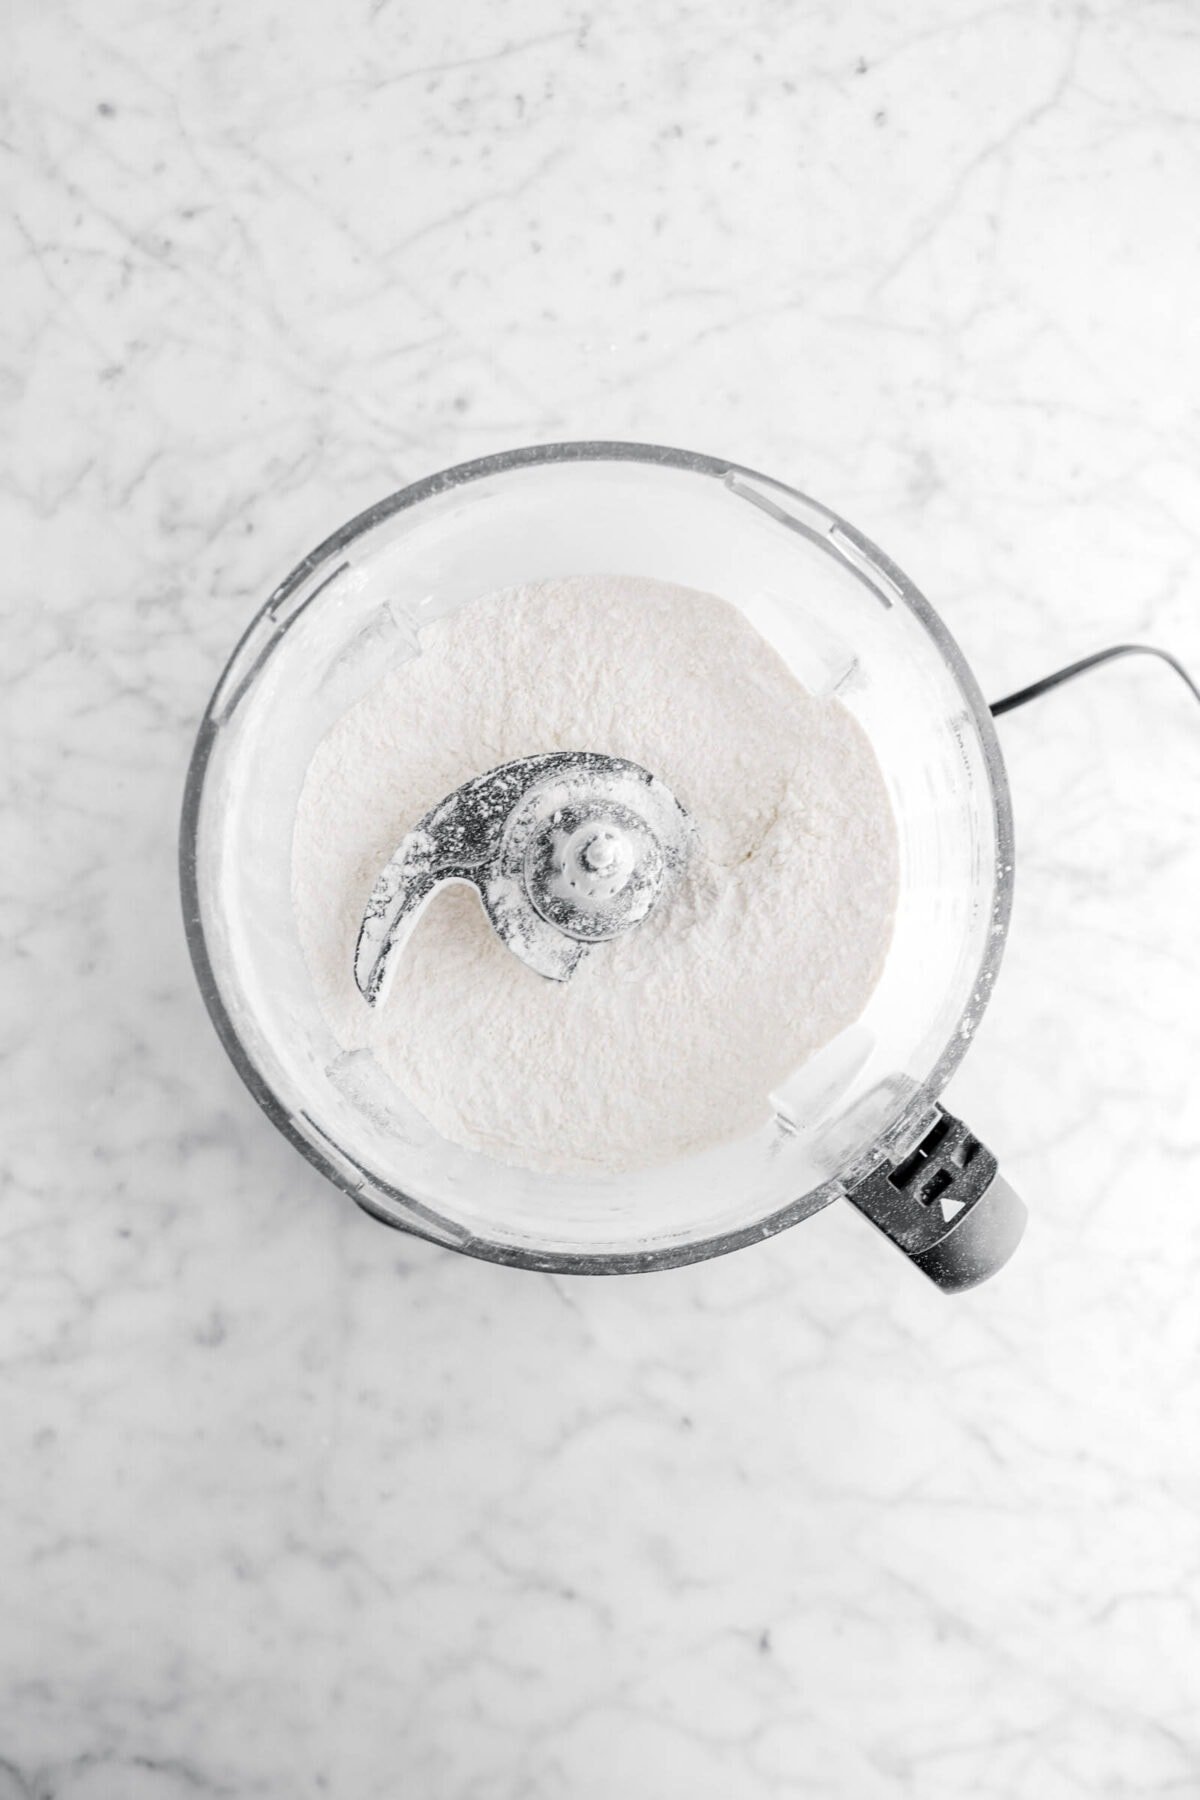 flour and powdered sugar combined in food processor